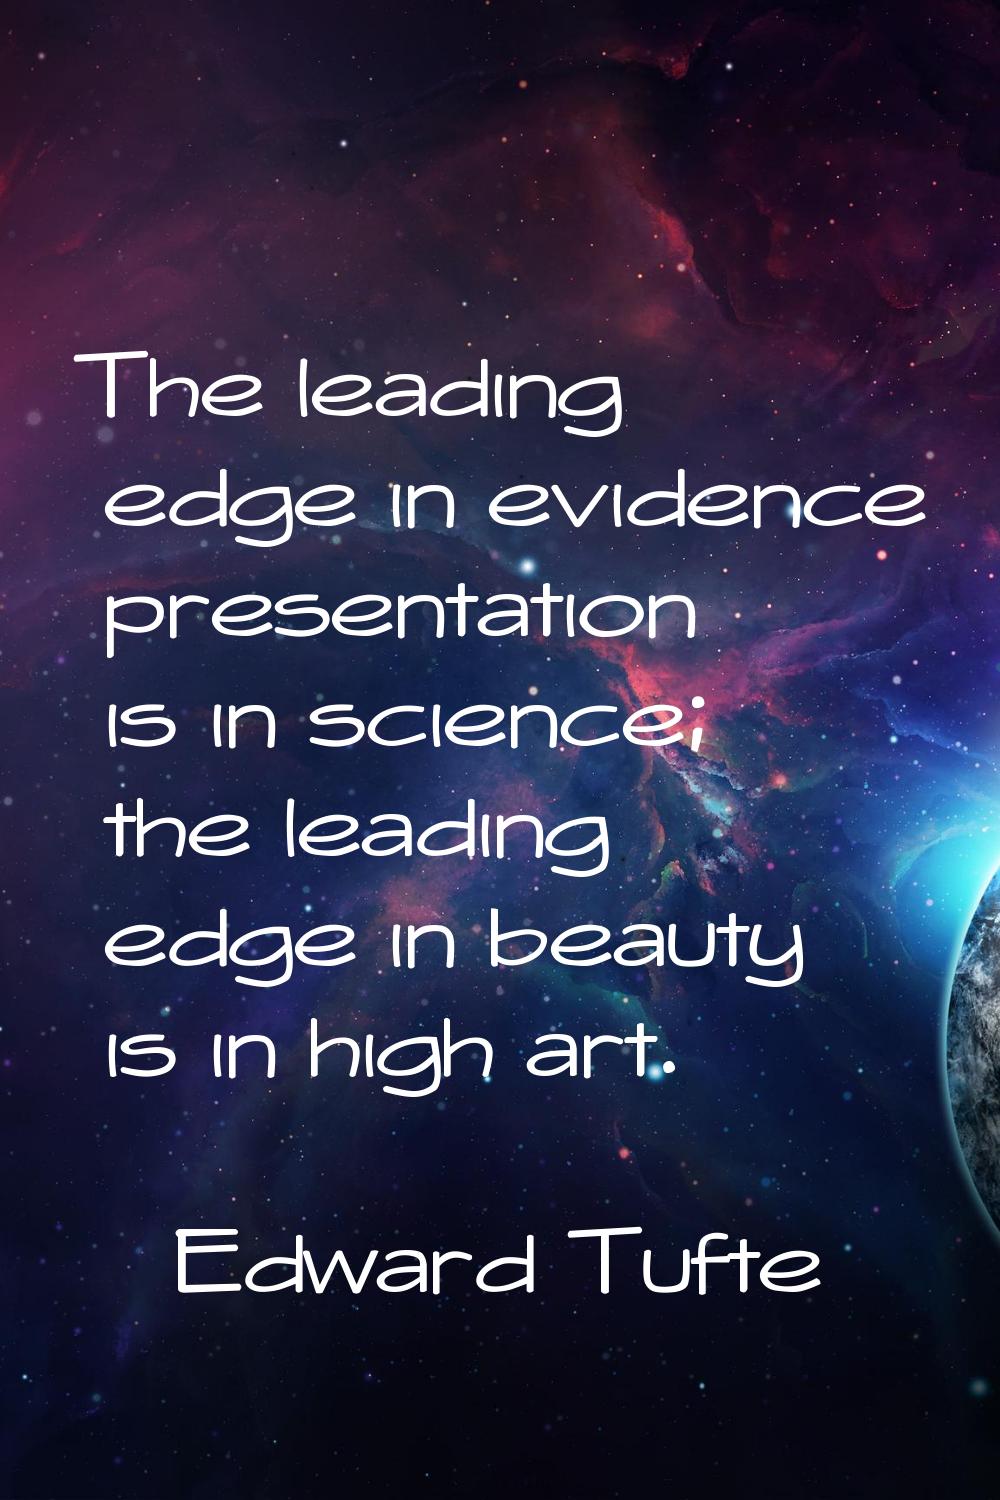 The leading edge in evidence presentation is in science; the leading edge in beauty is in high art.